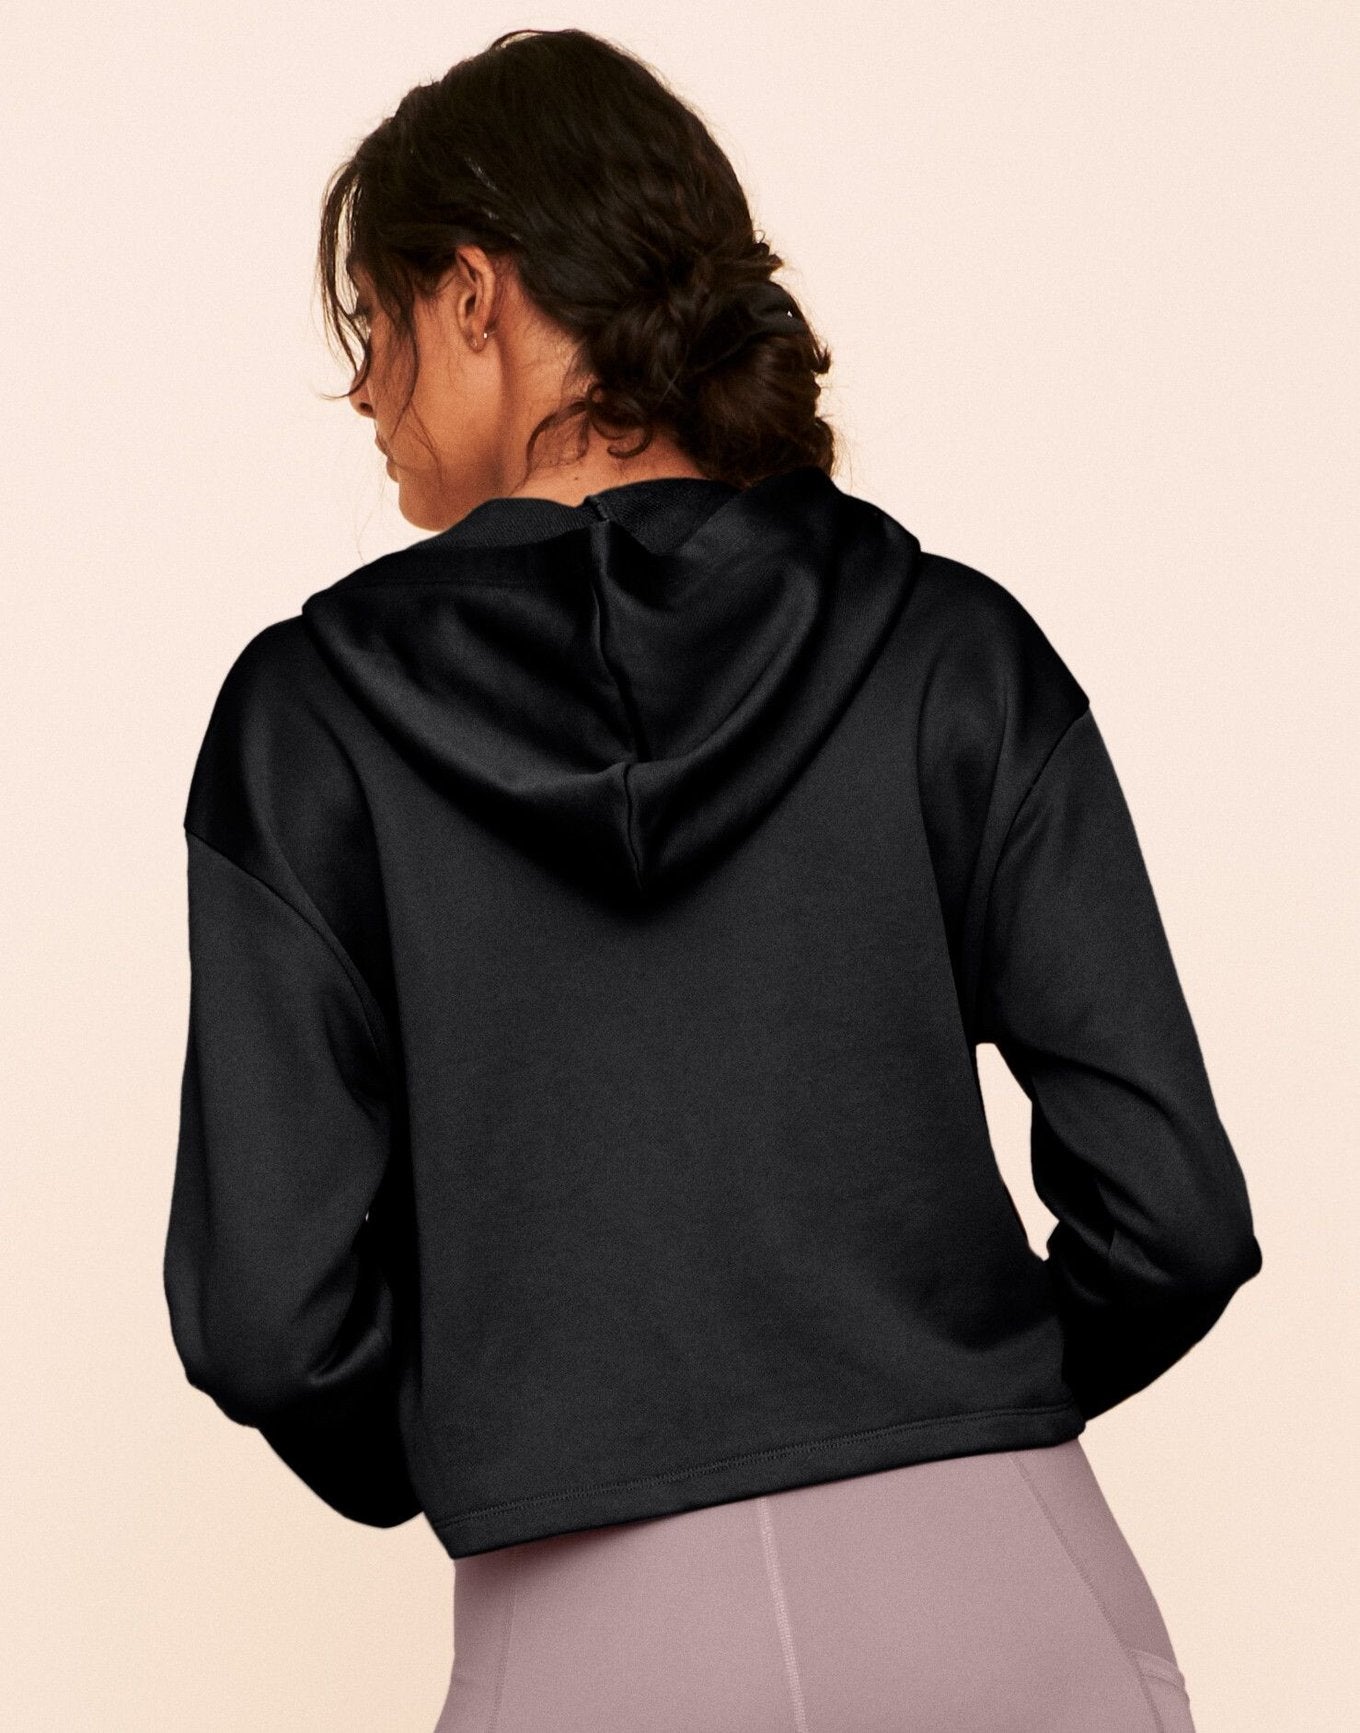 Earth Republic Myah Escape Luxe Hoodie Cropped Hoodie in color Jet Black and shape hoodie